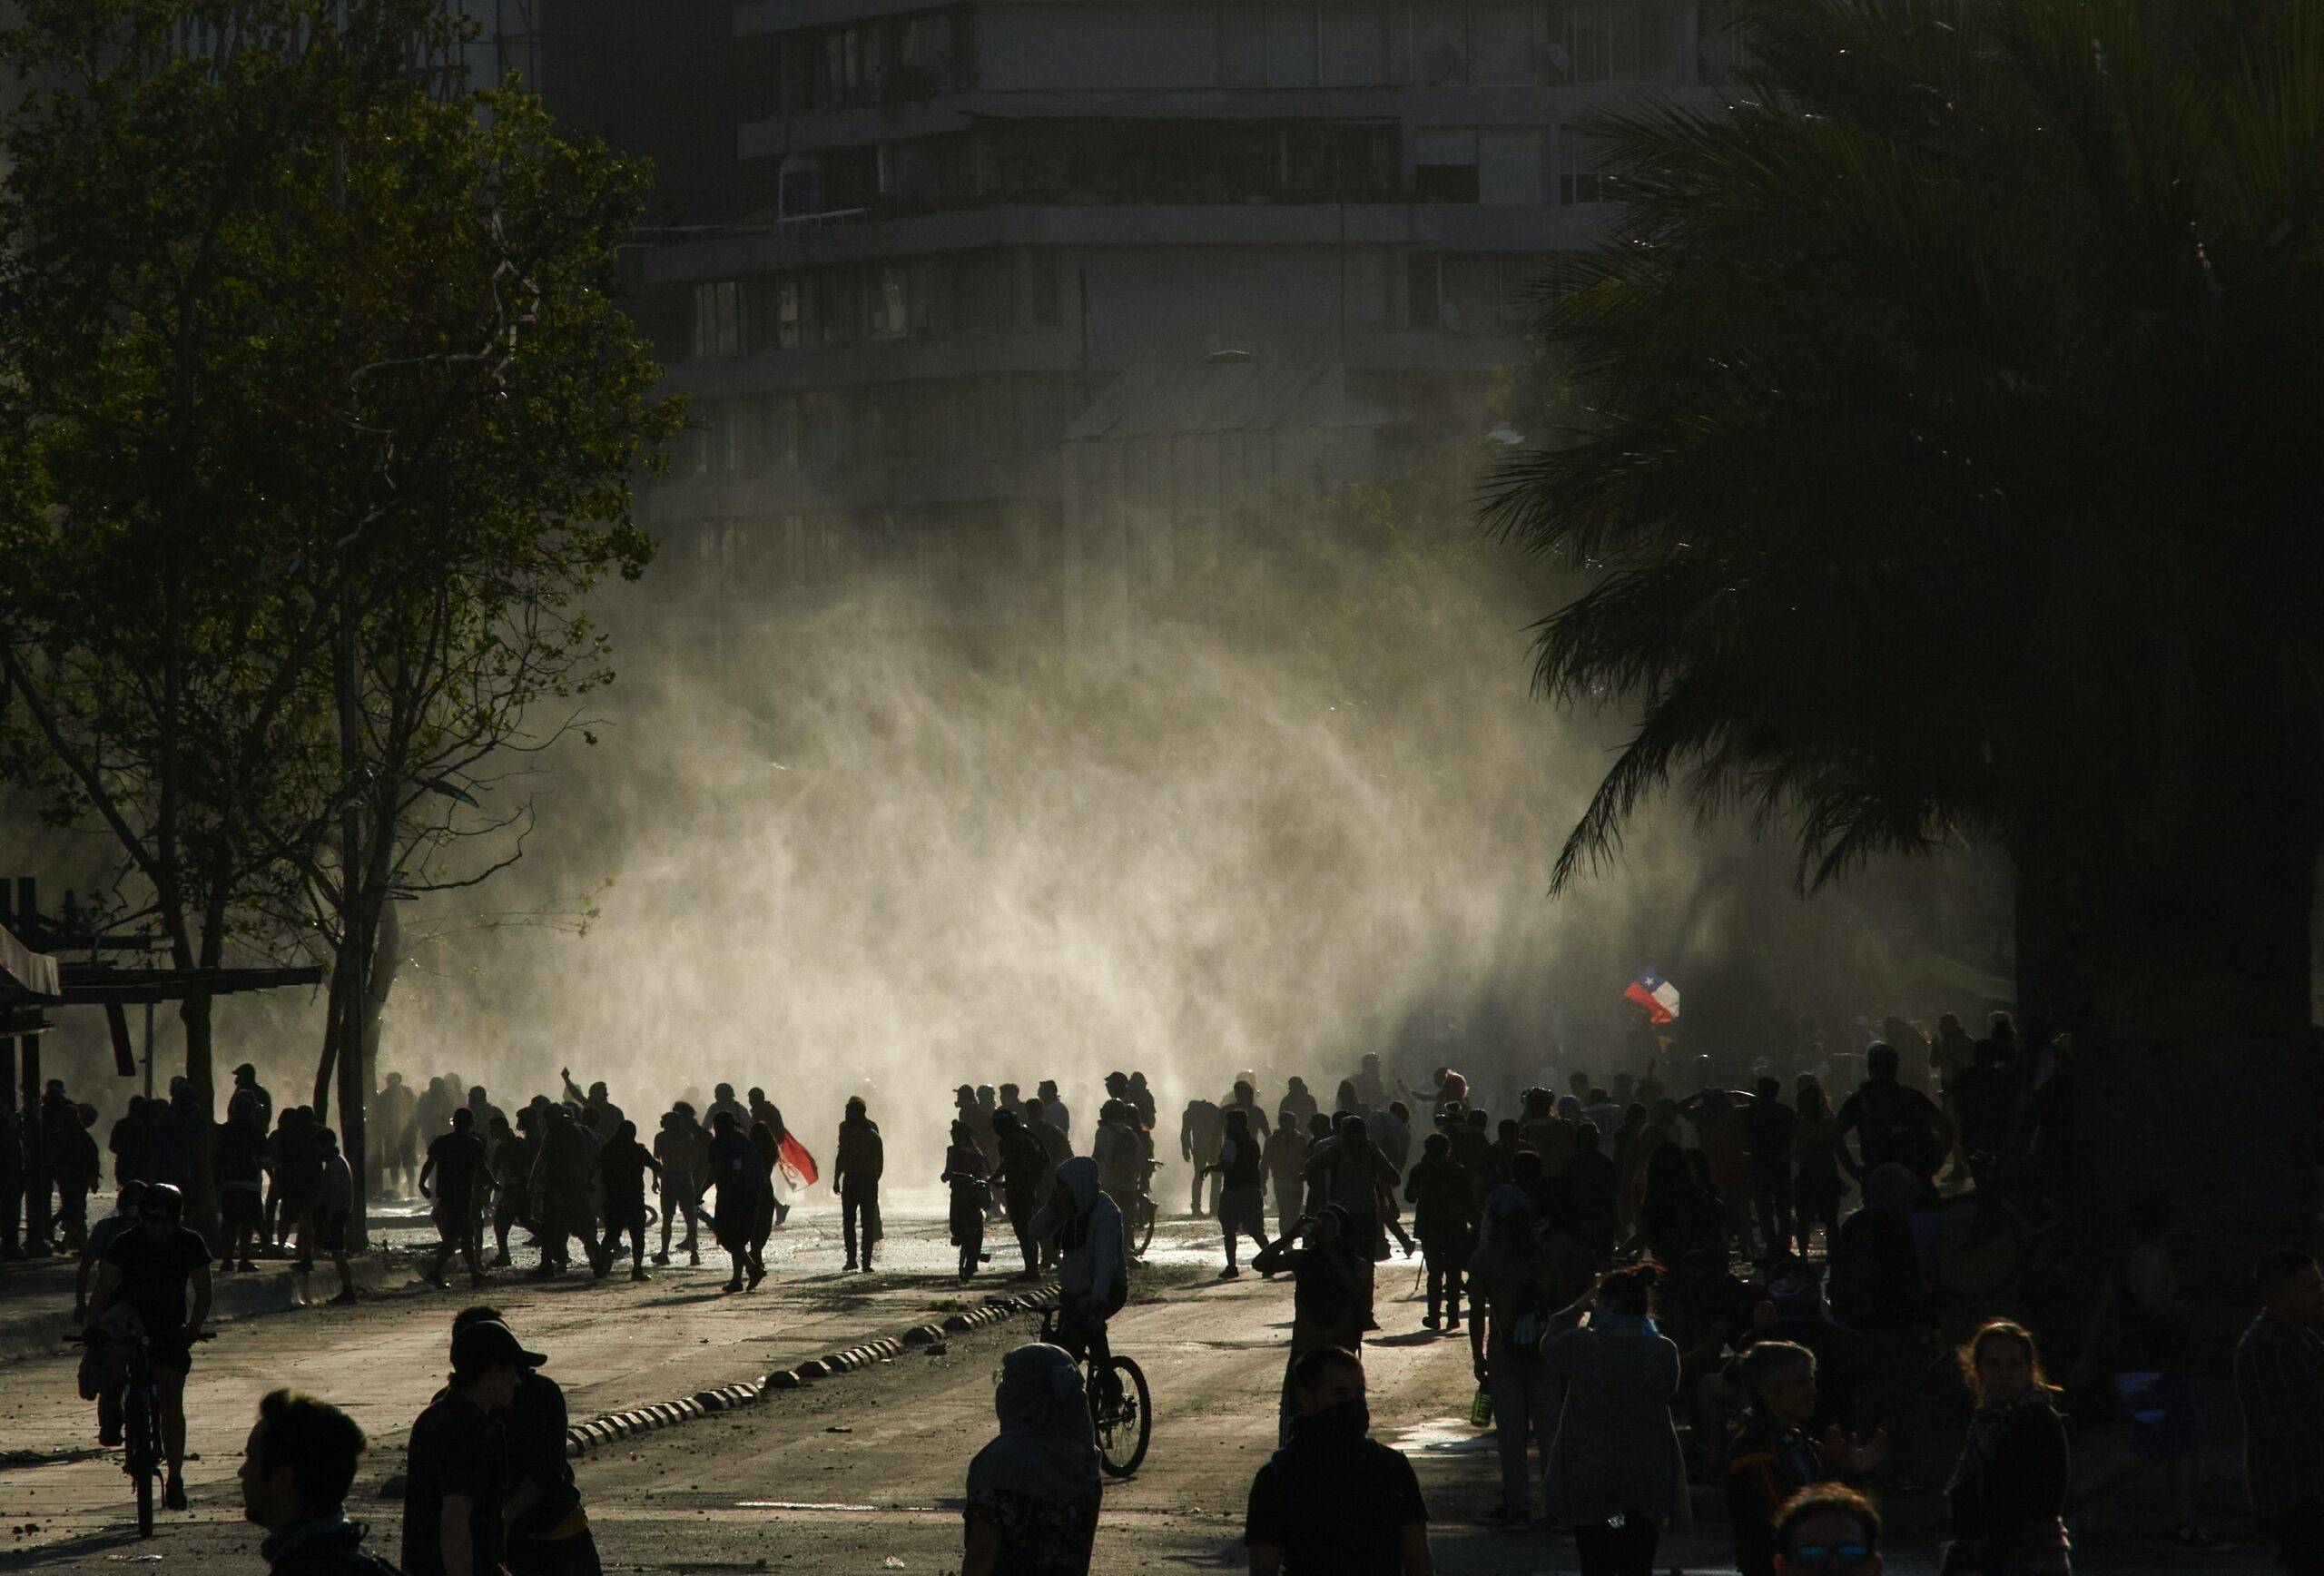 dark scene of people gathering on the streets with smoke in the background